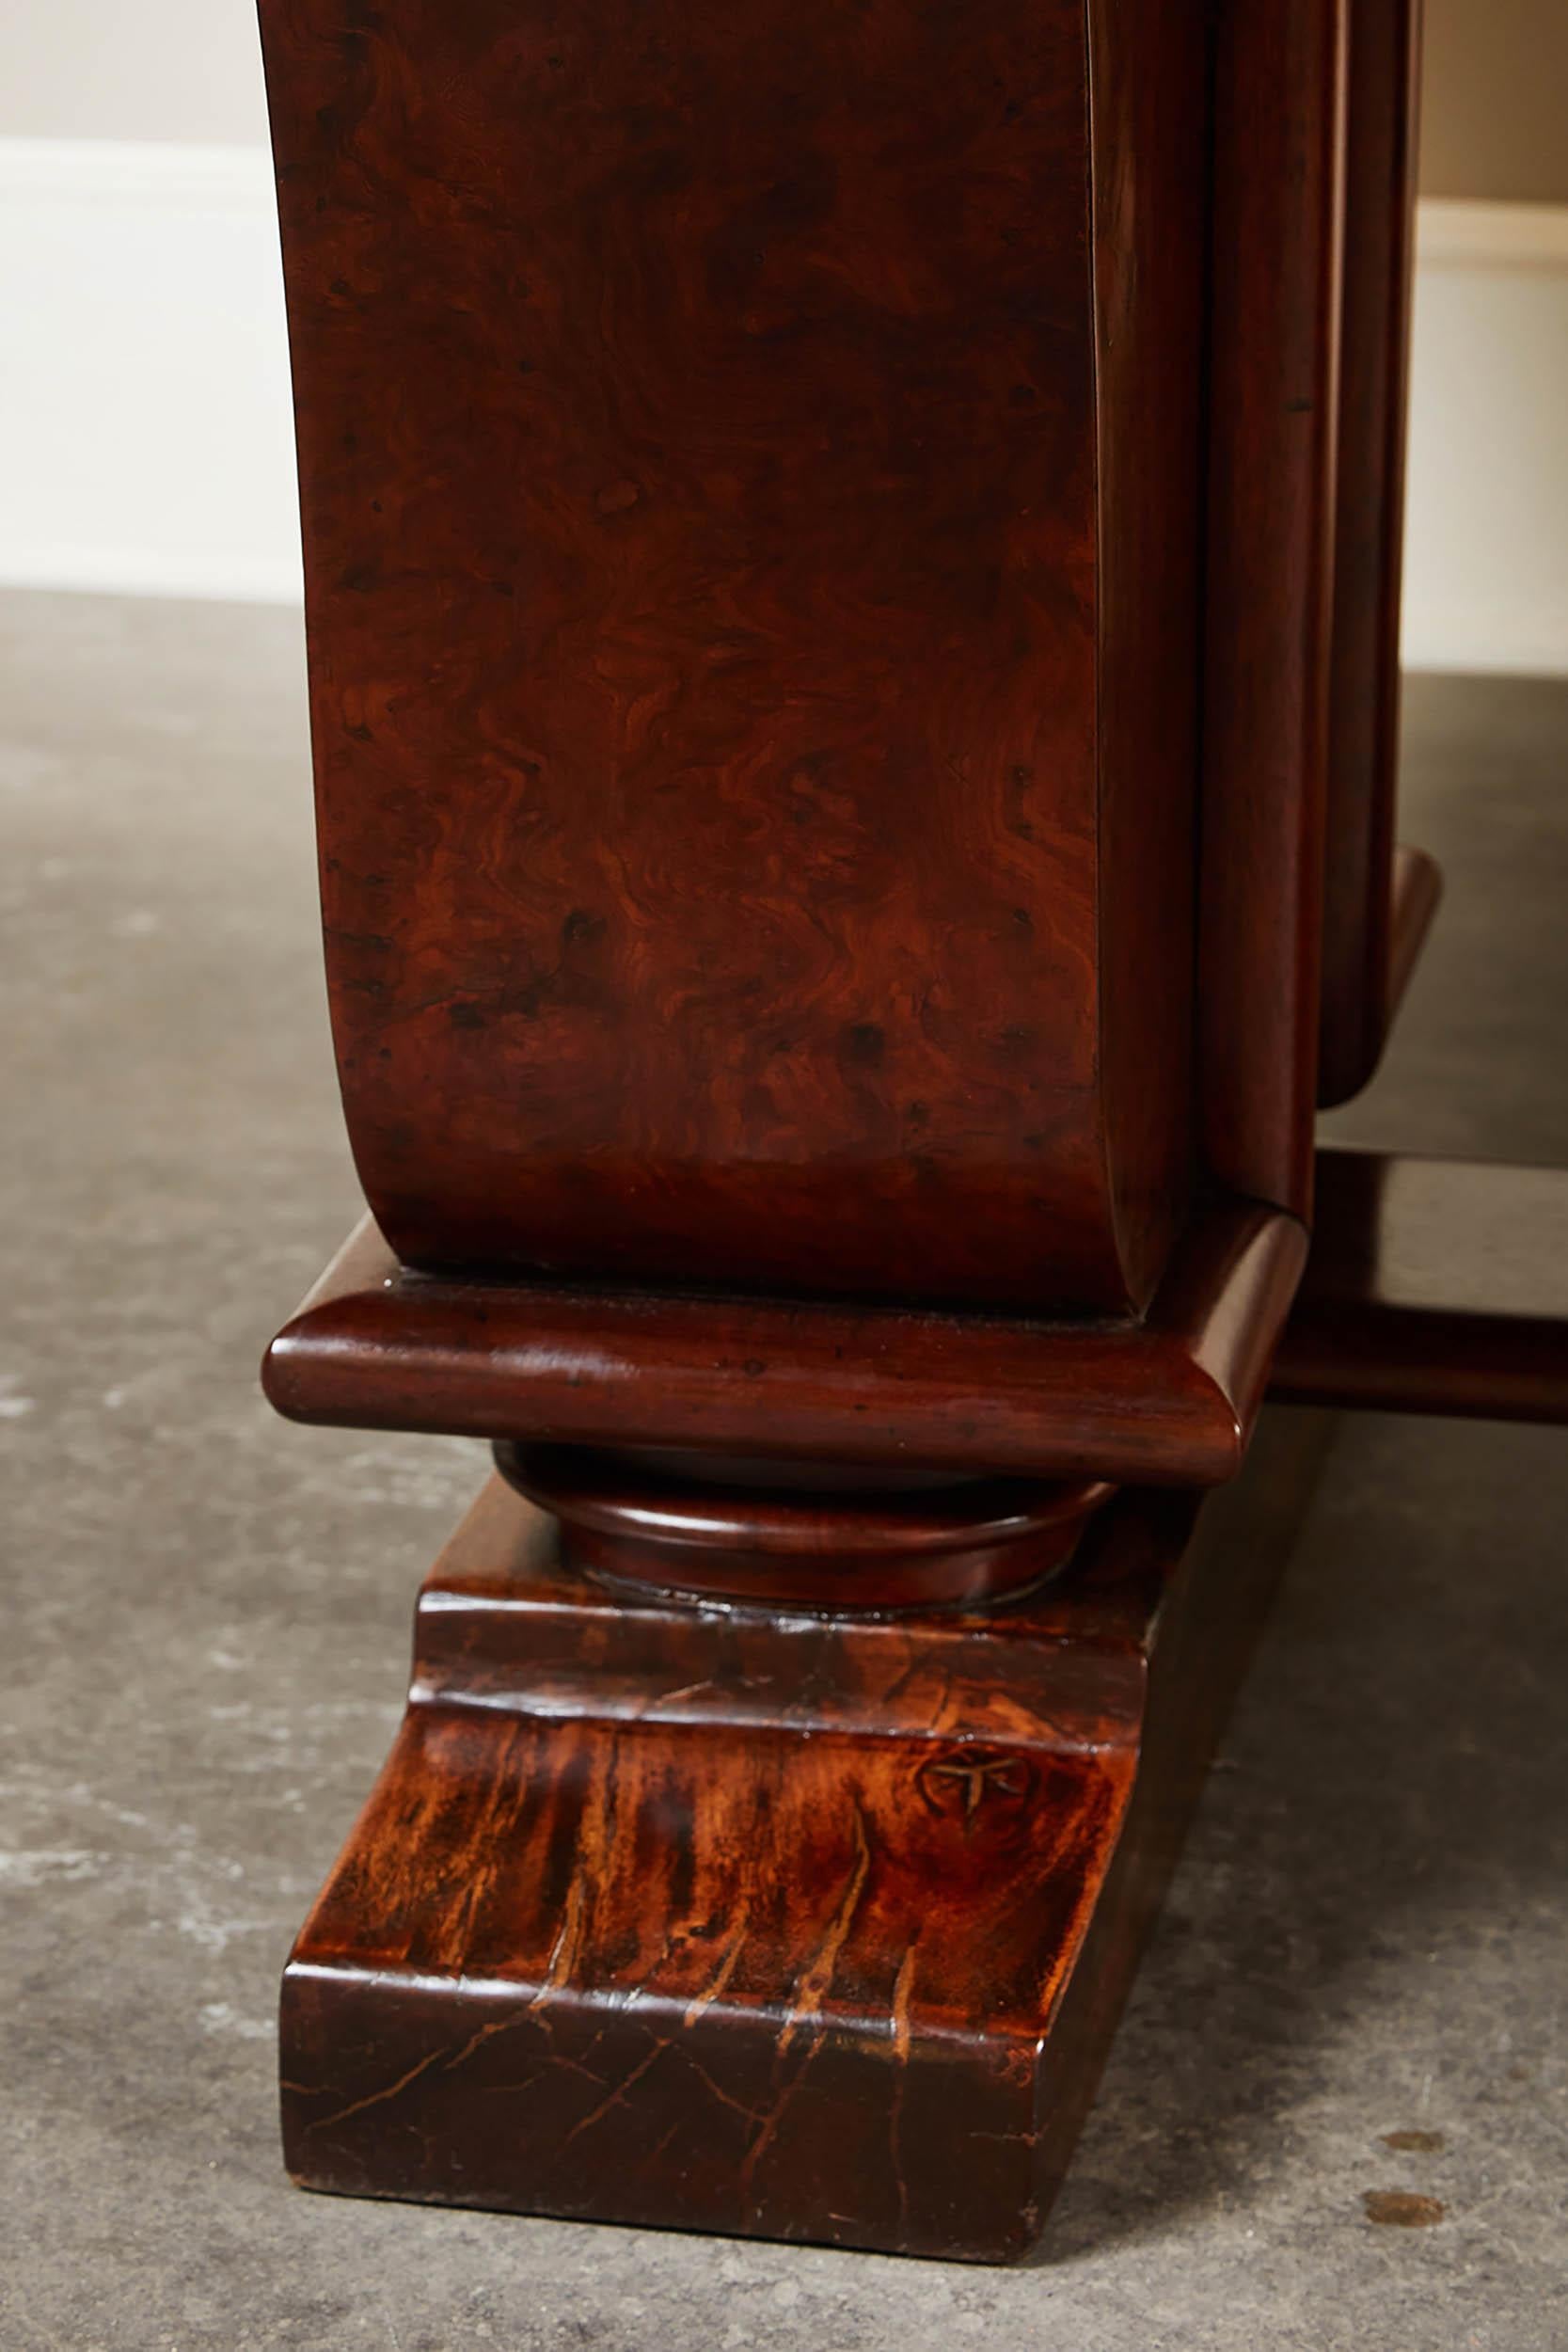 An elegant Art Deco dining table made in French Indo-China for the local expatriate market. The rectangular top of curly-grained burl rosewood, with a slightly projecting molding along the lower edge, echoed in the moldings of the S-curved panel